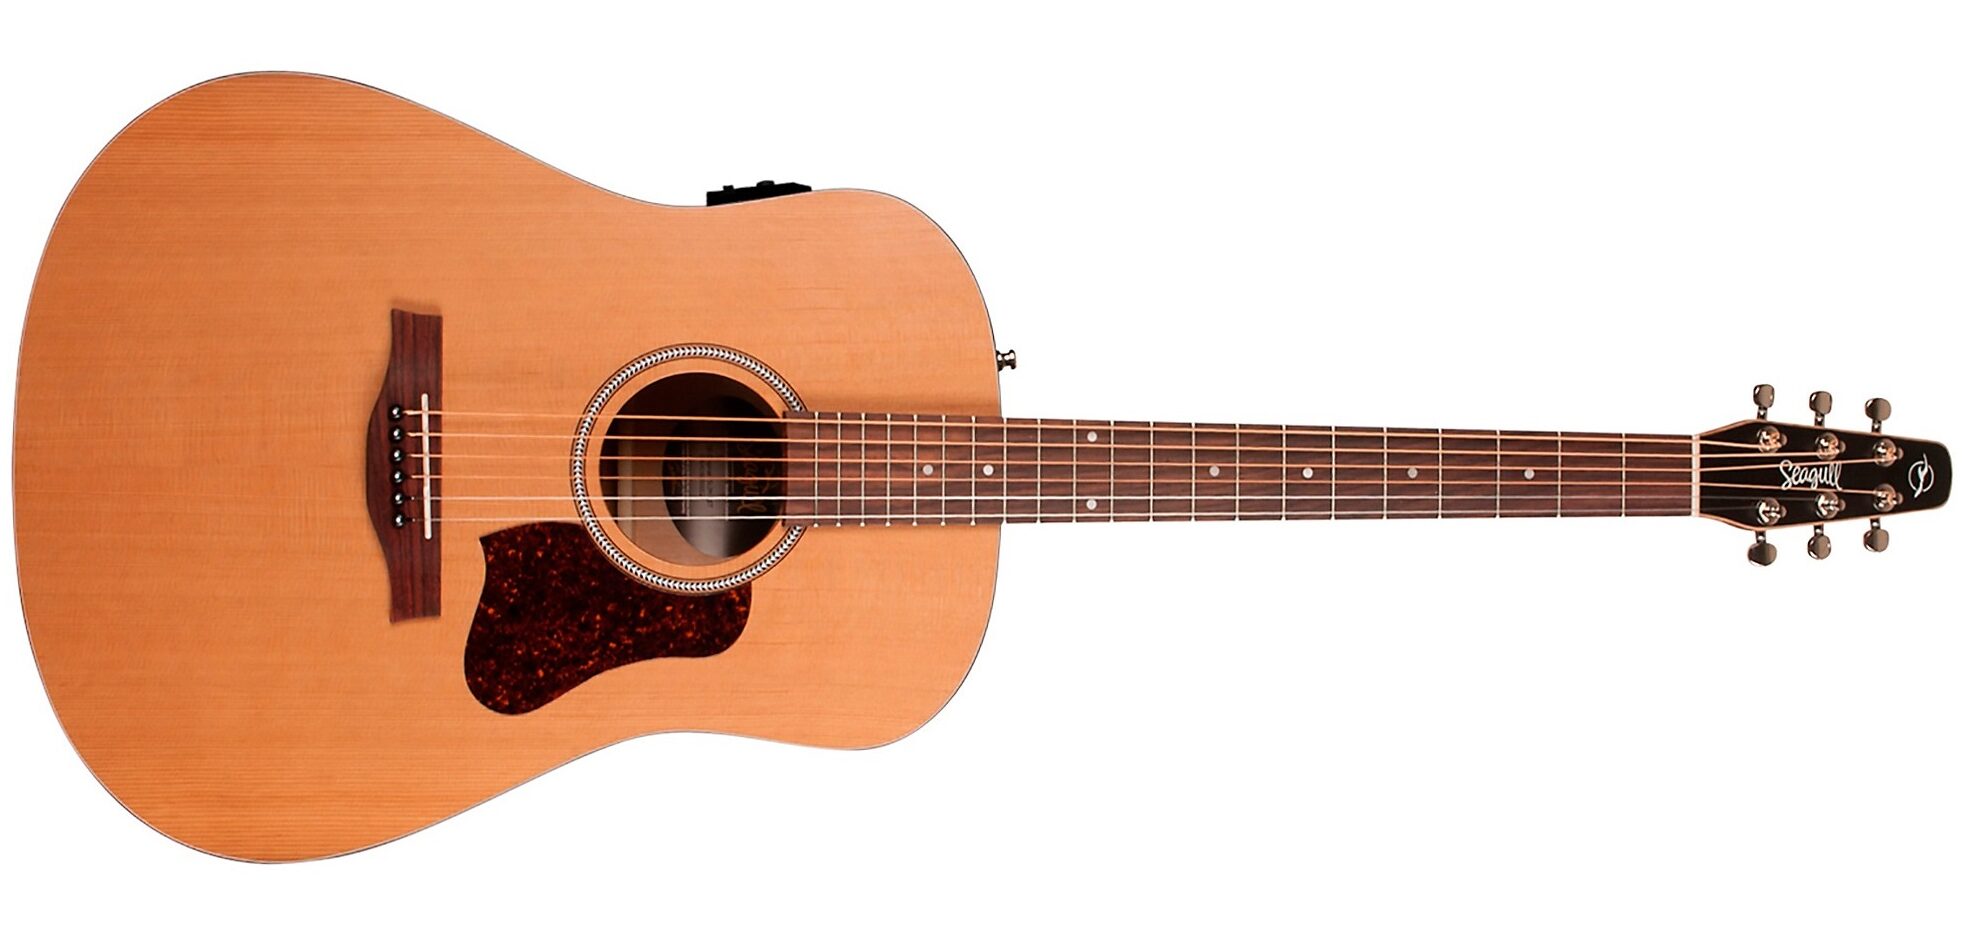 Seagull S6 Original Slim Acoustic Guitar on a white background